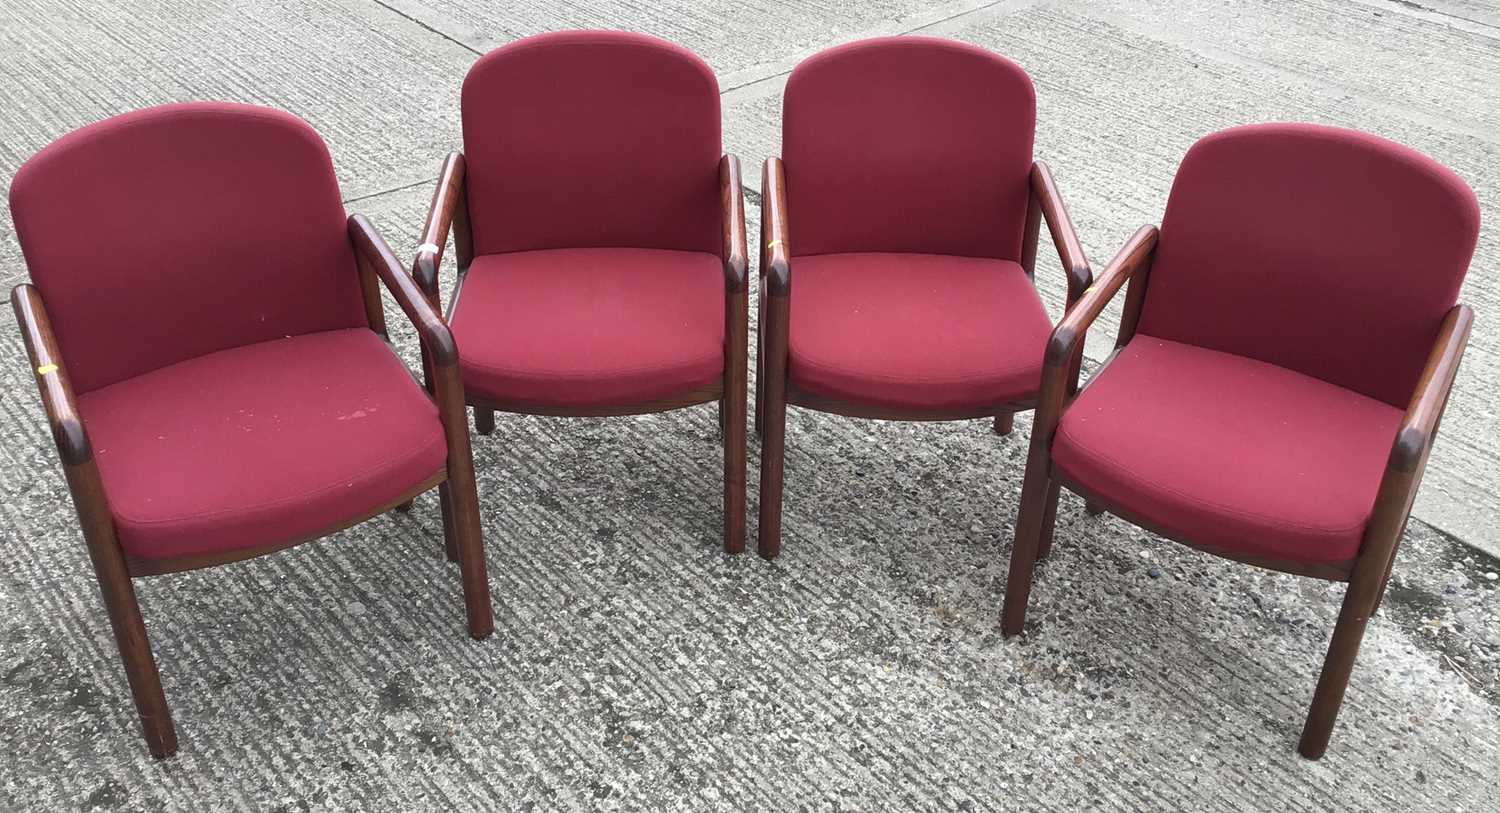 Set of four Gordon Russell modern design elbow chairs (to be sold as a work of art)